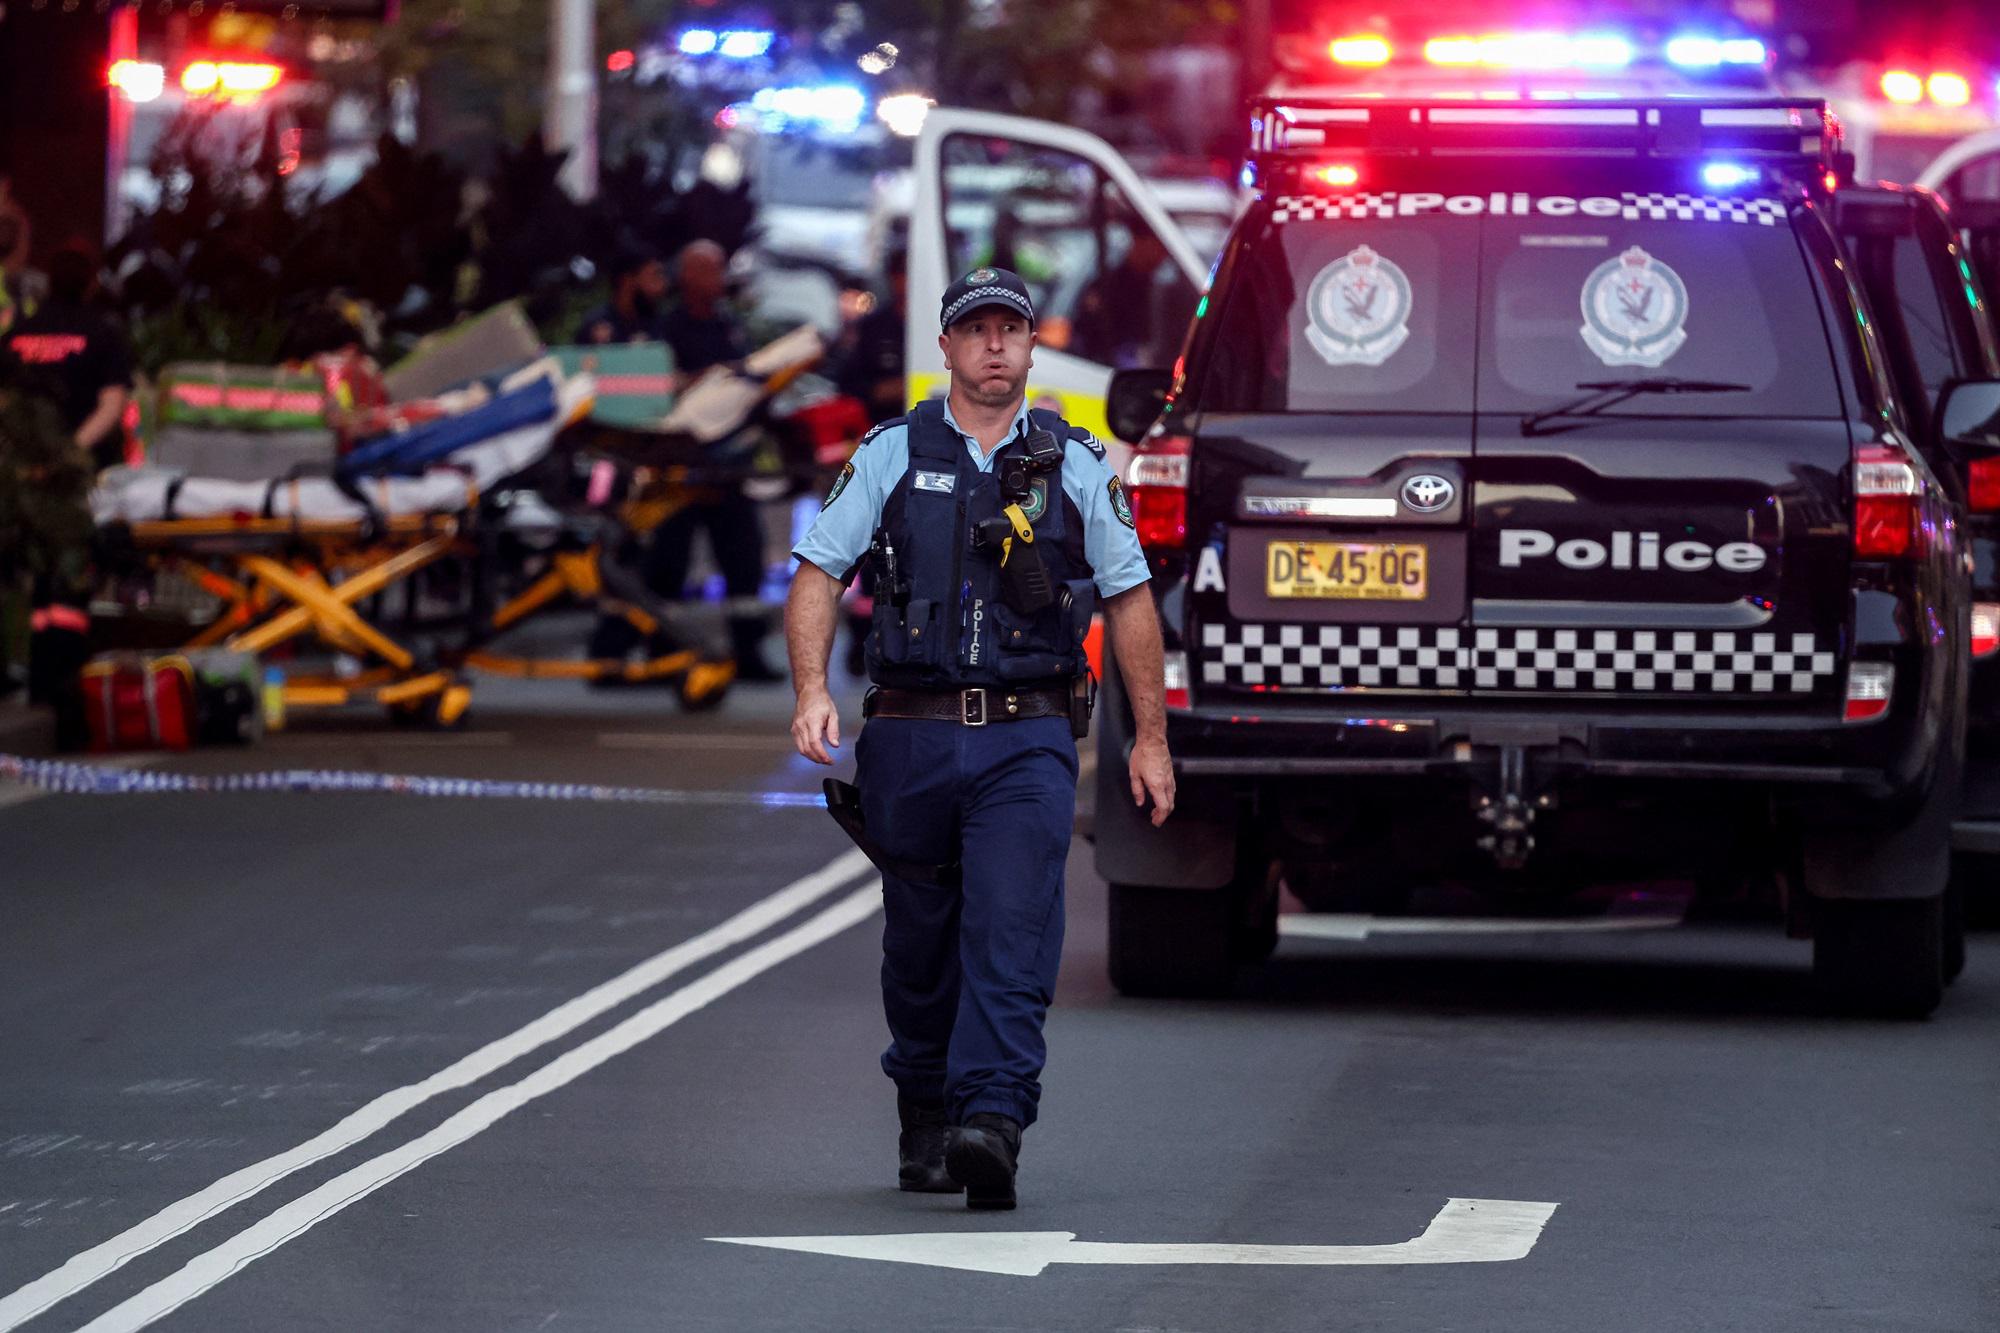 Terror in a Sydney shopping mall: “Several people stabbed”